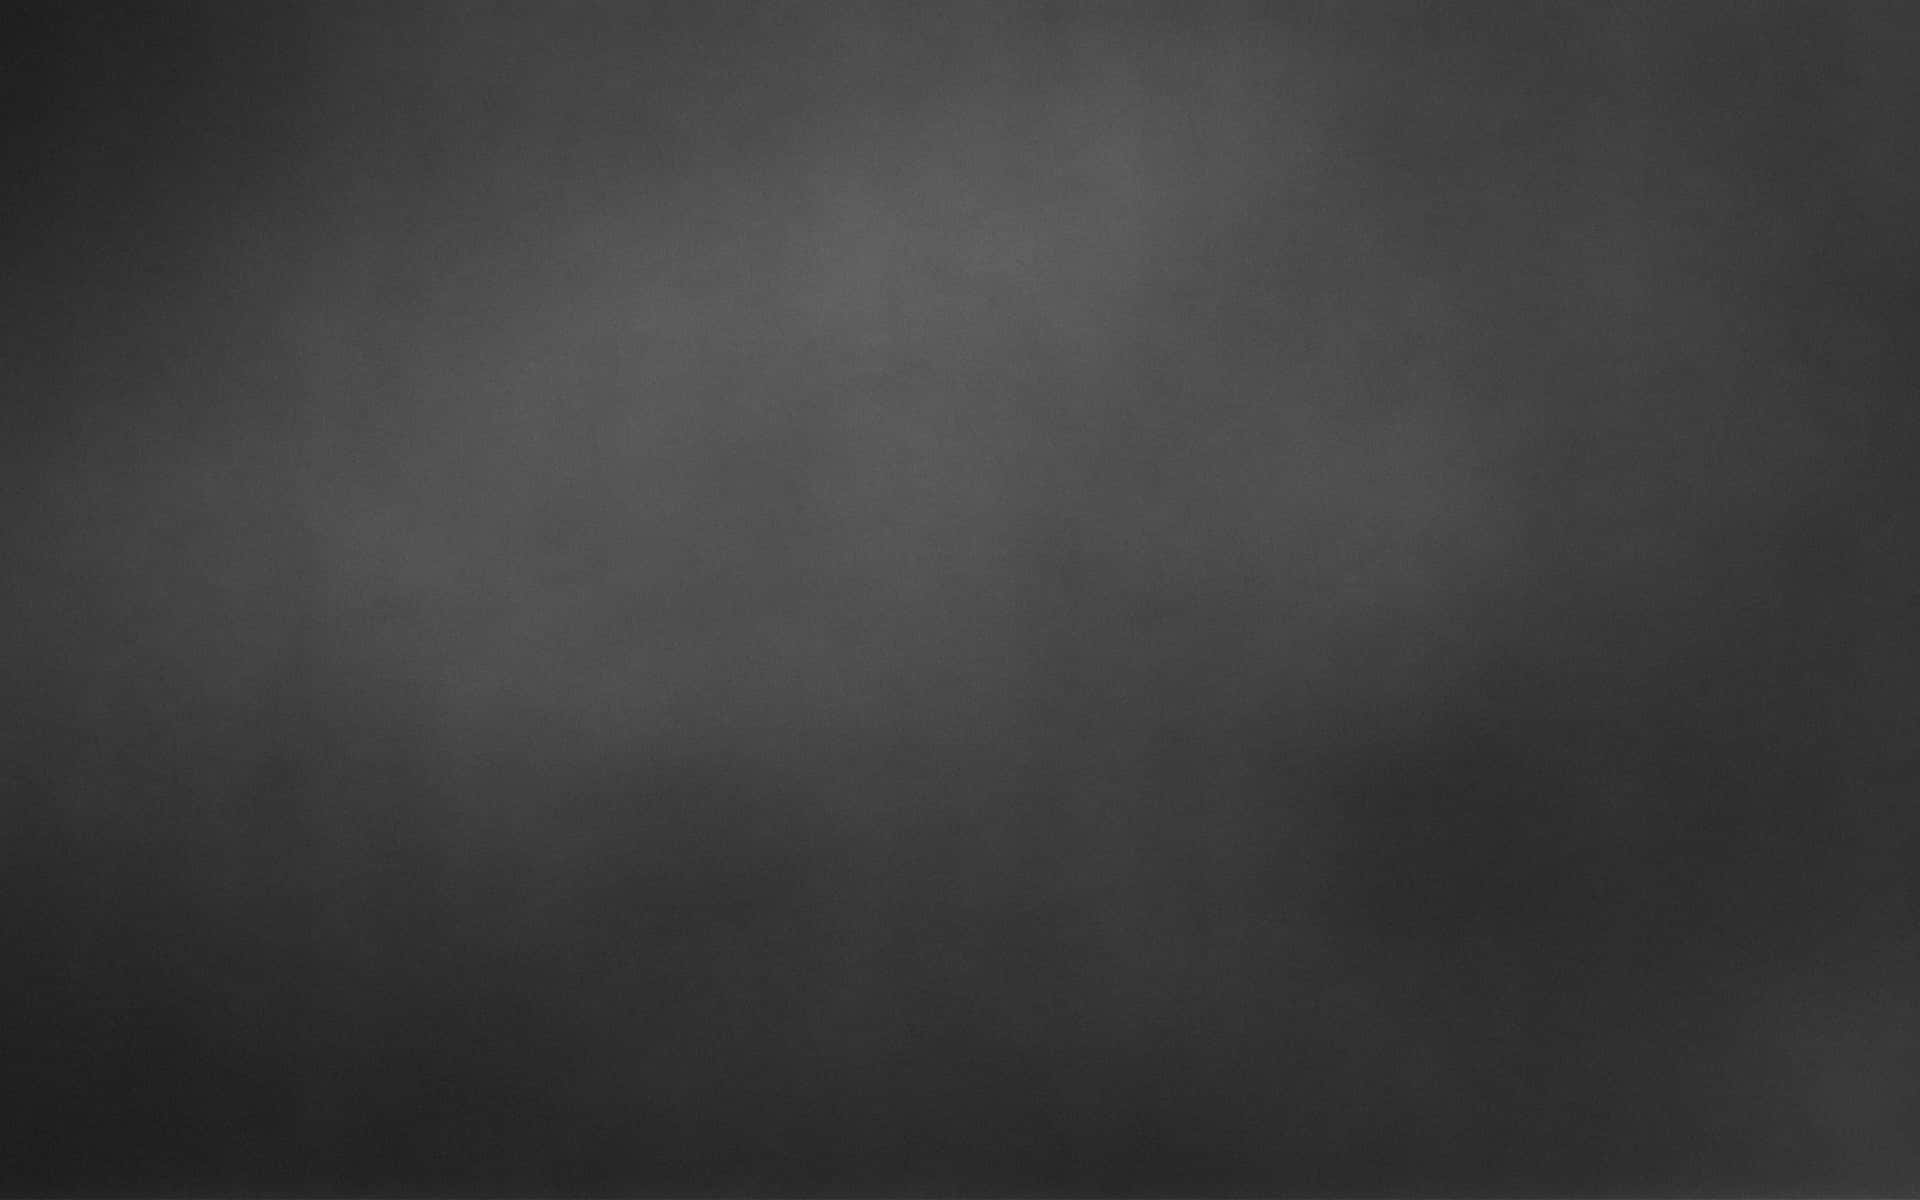 Check out this amazing black and grey abstract background